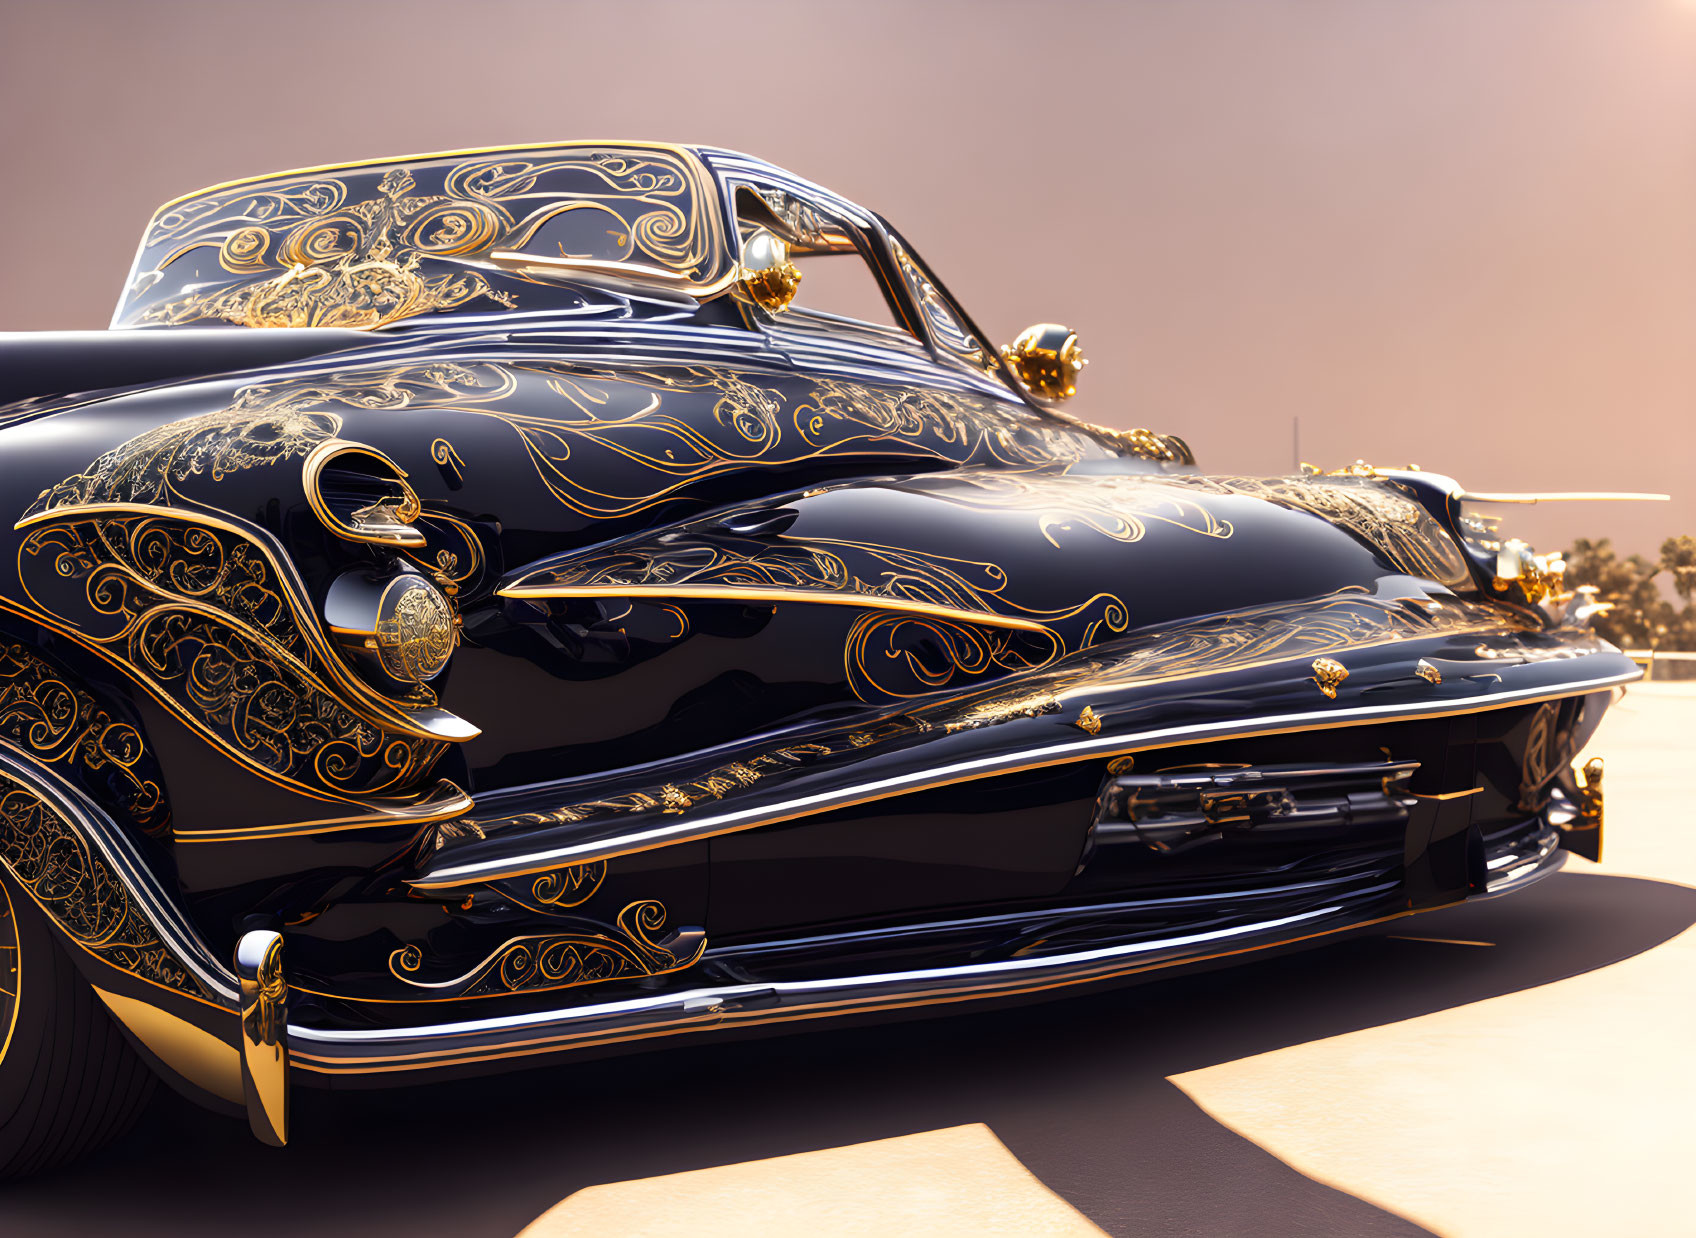 Vintage classic car with gold pinstripe detail under warm sky